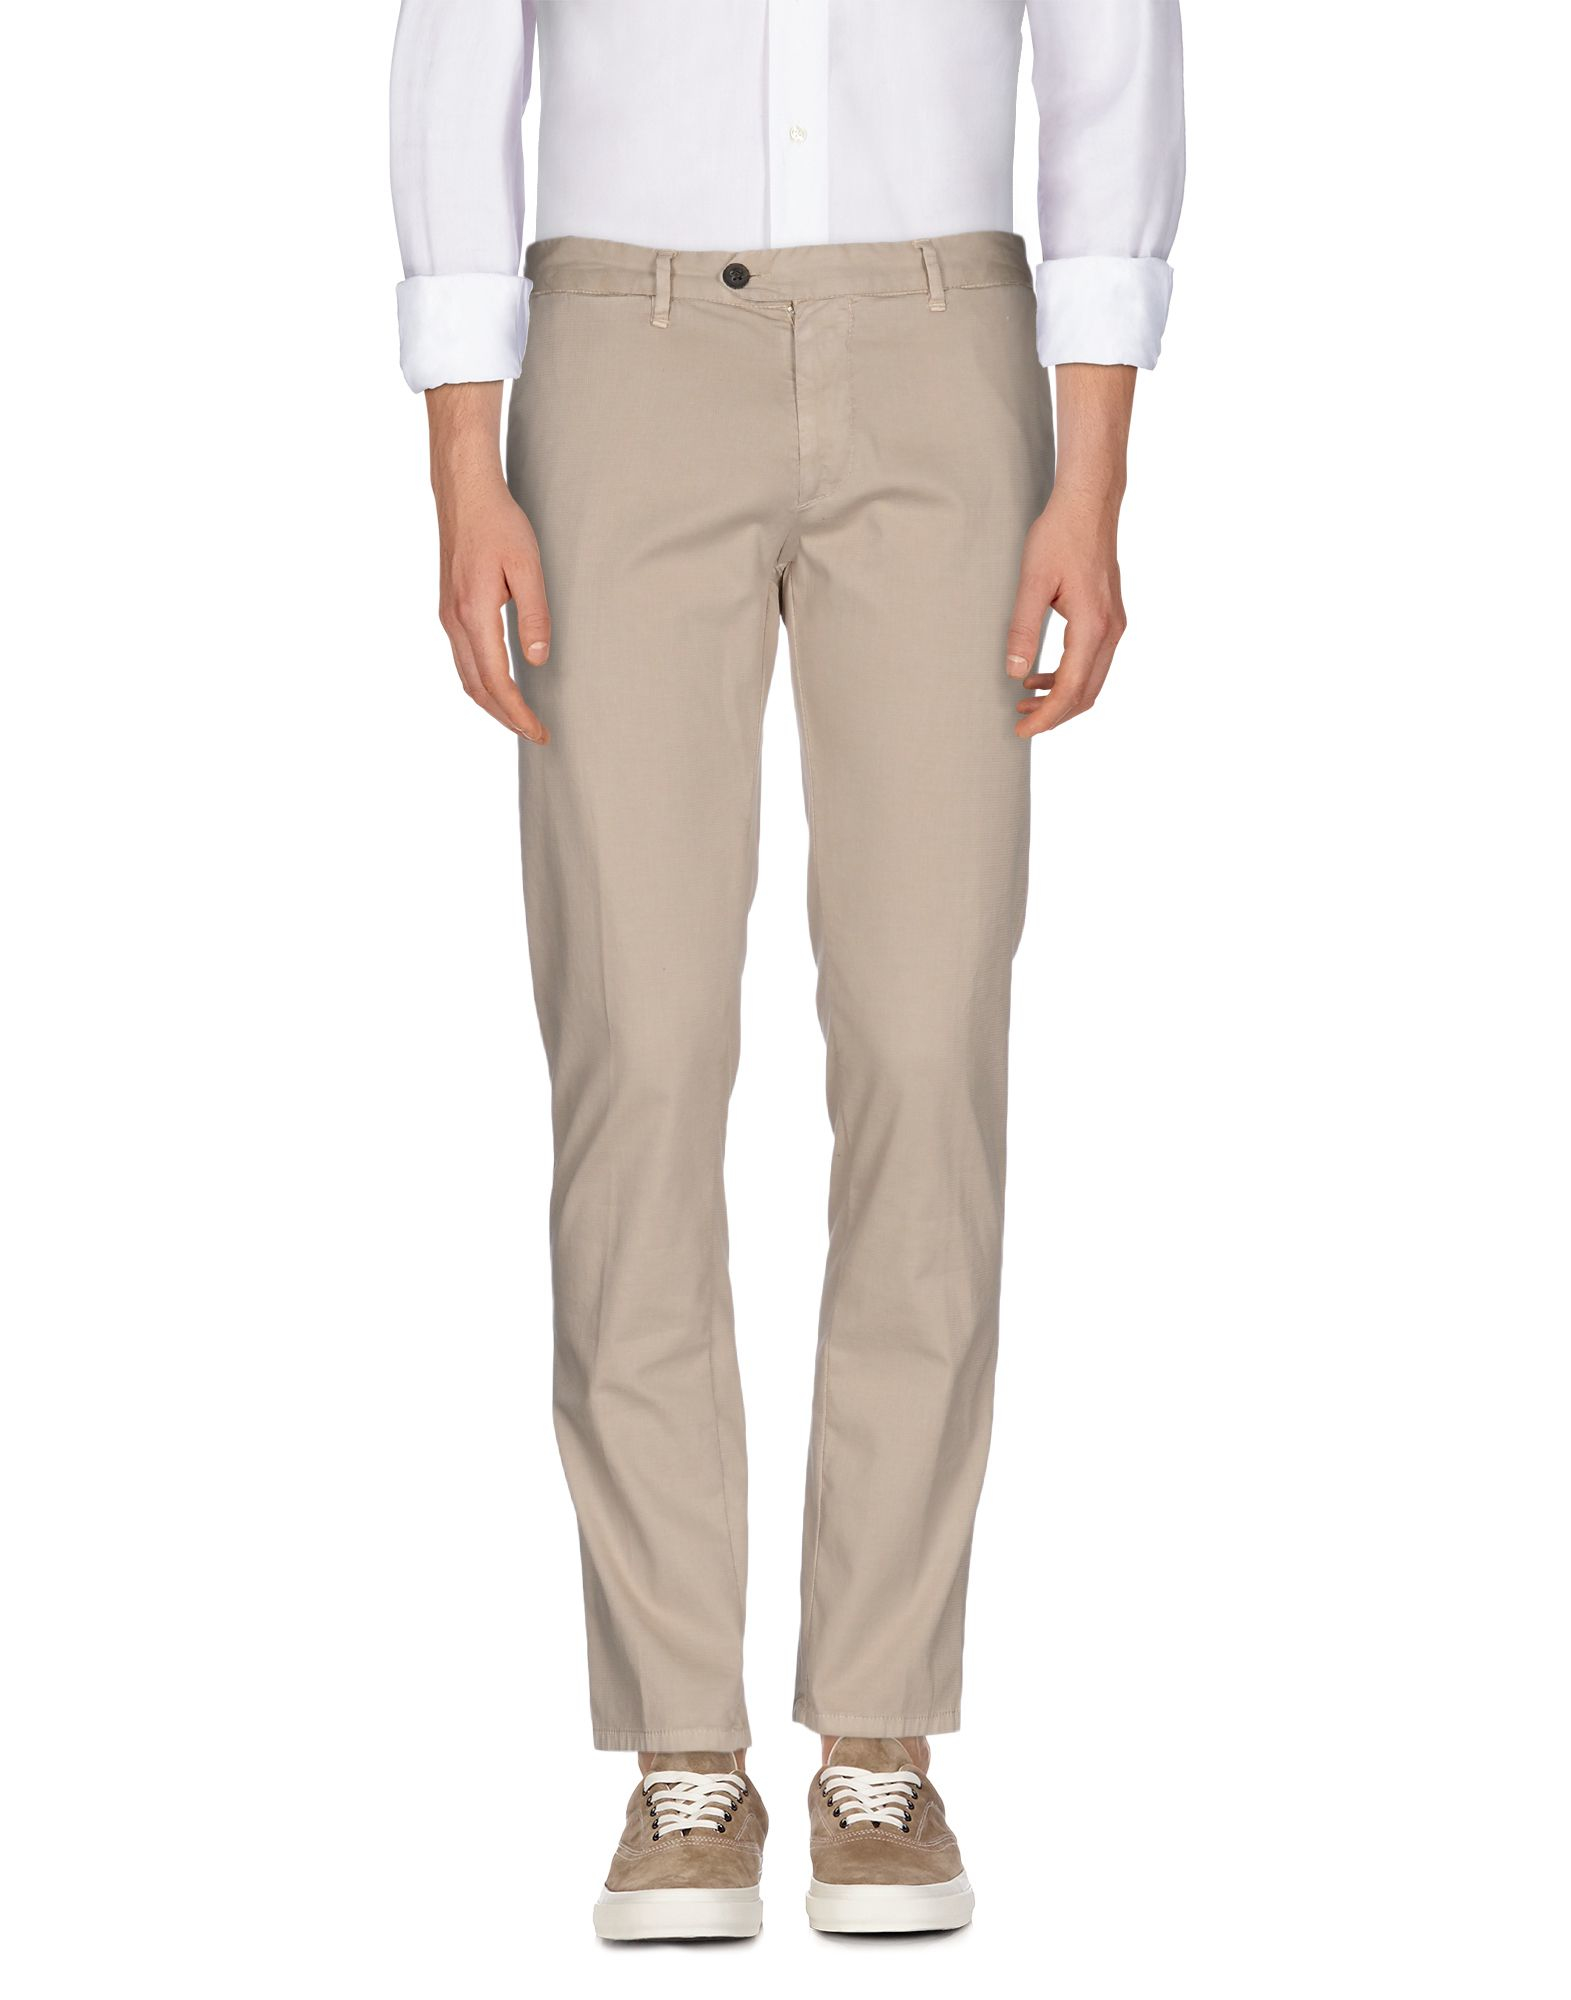 Myths Casual Trouser in Beige for Men - Save 70% | Lyst